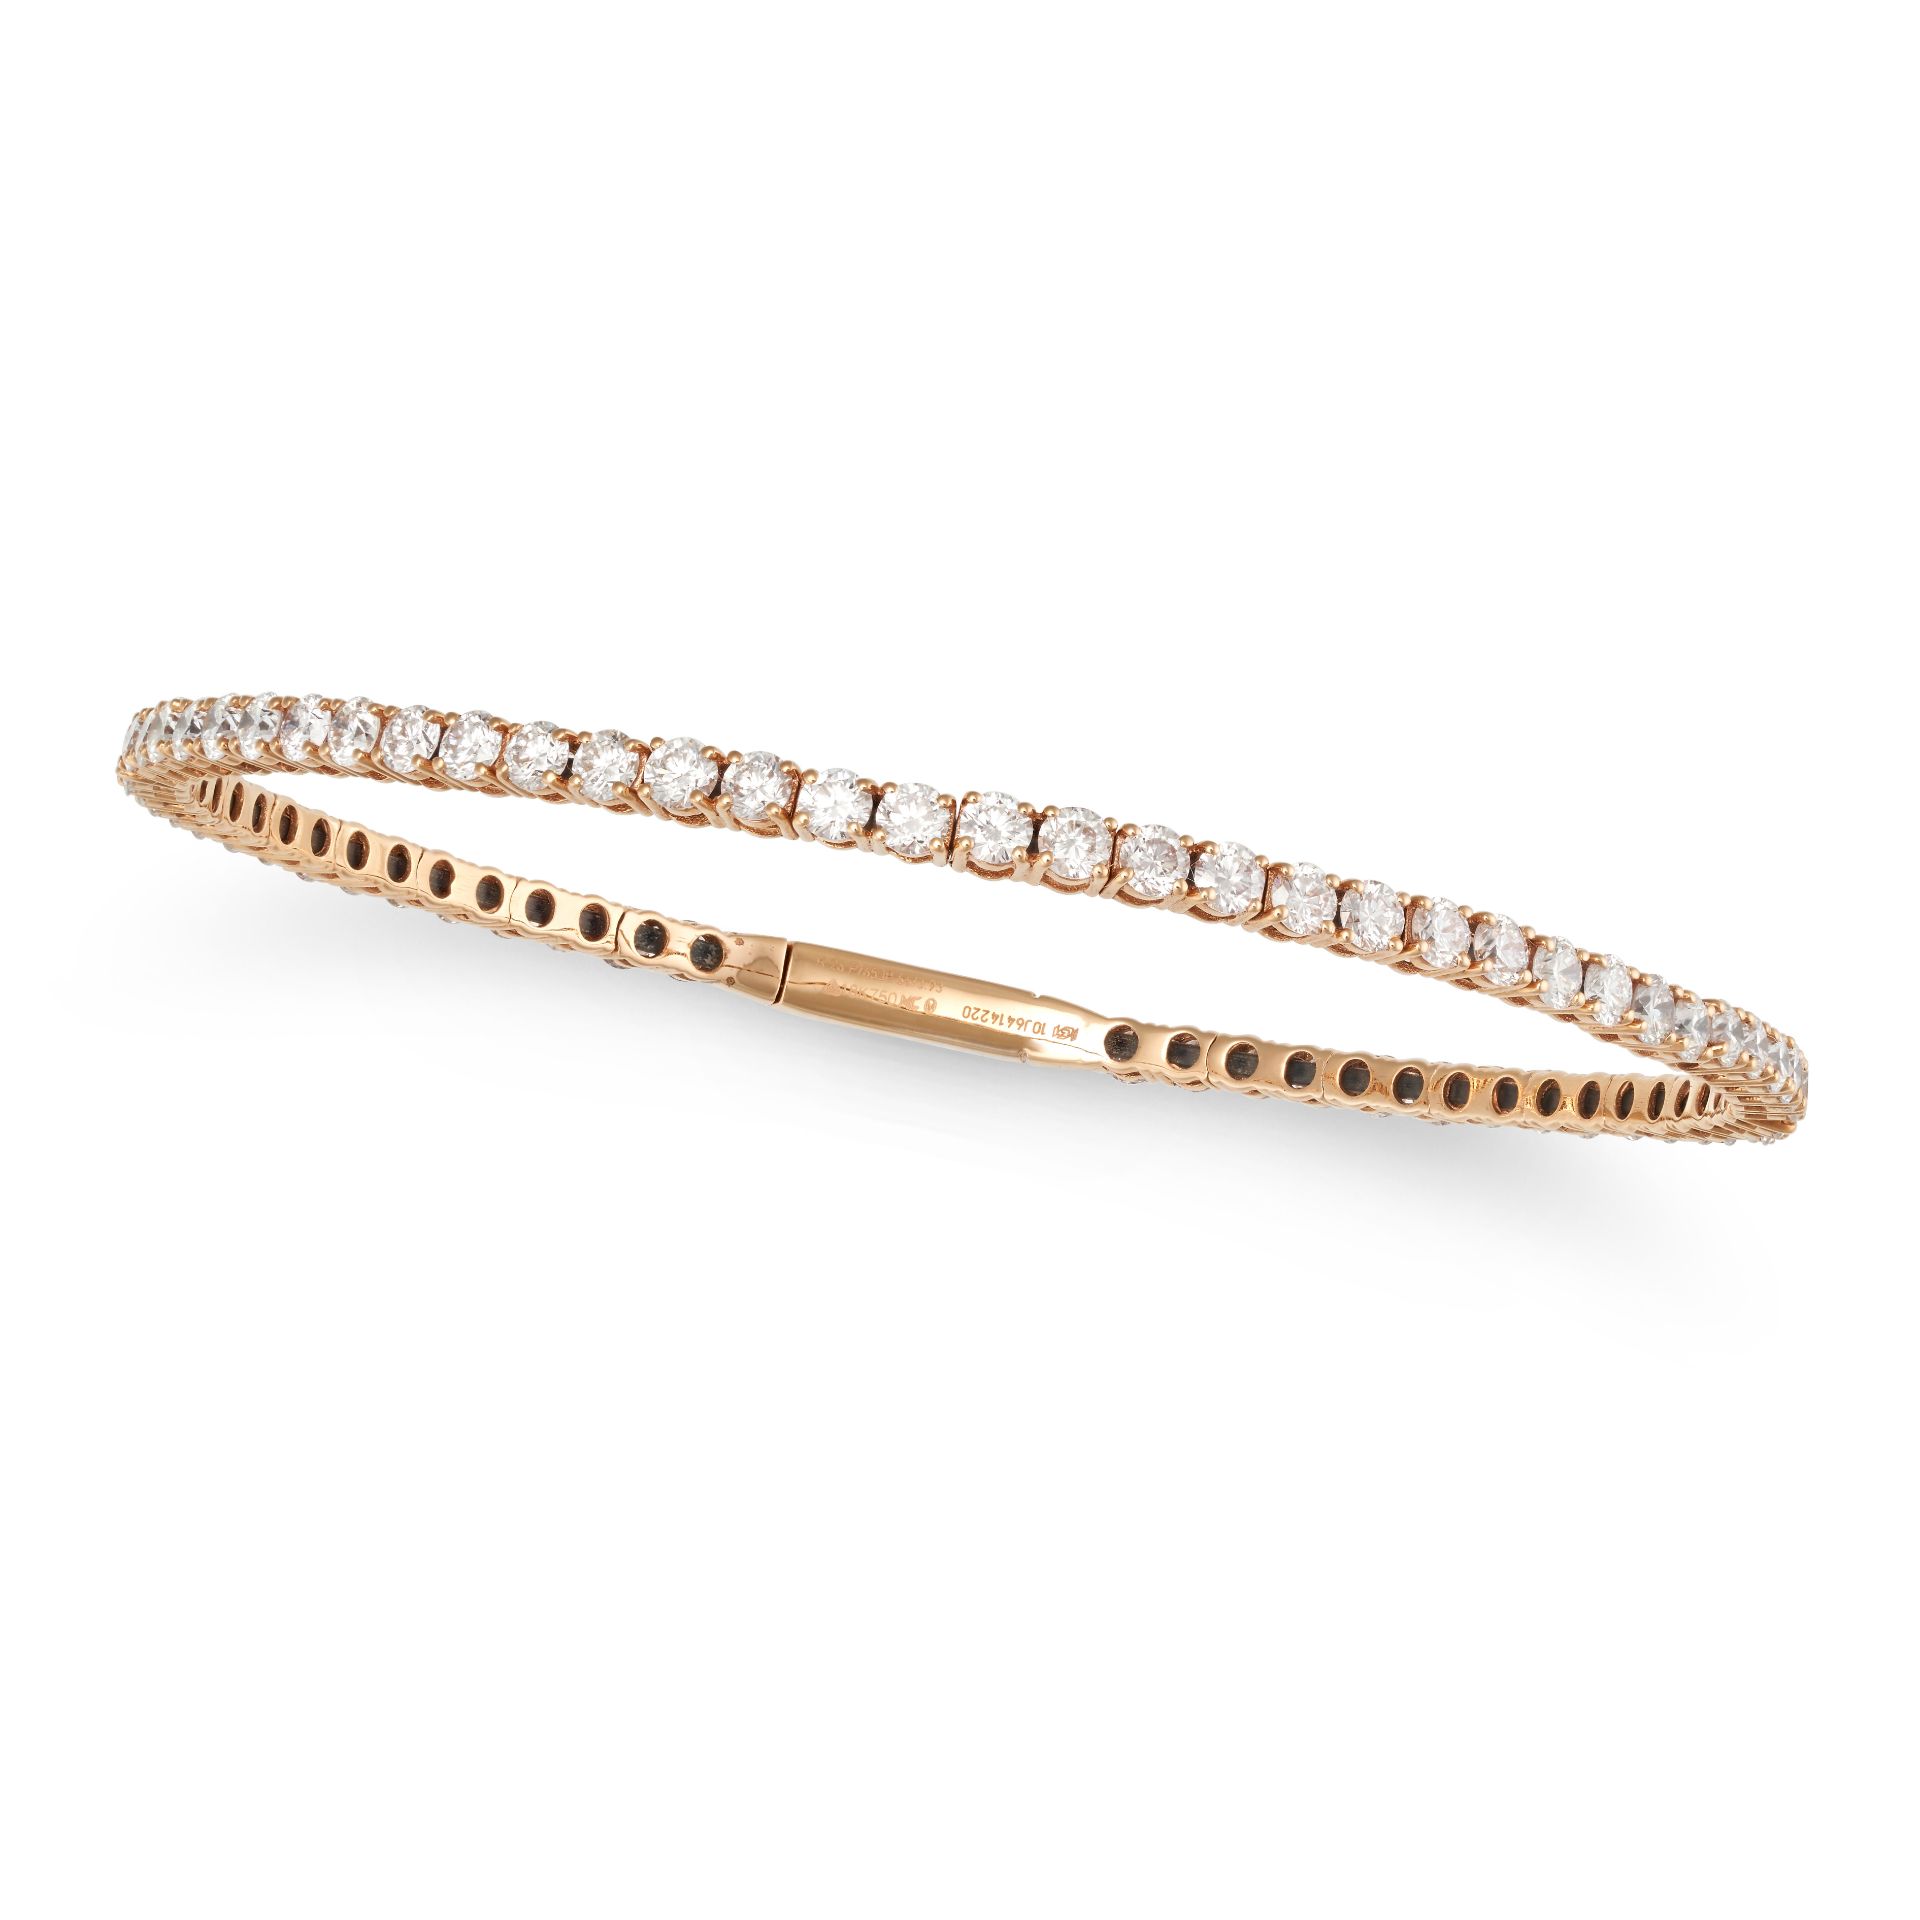 A DIAMOND BANGLE in 18ct rose gold, the flexible bangle set all around with round brilliant cut d...